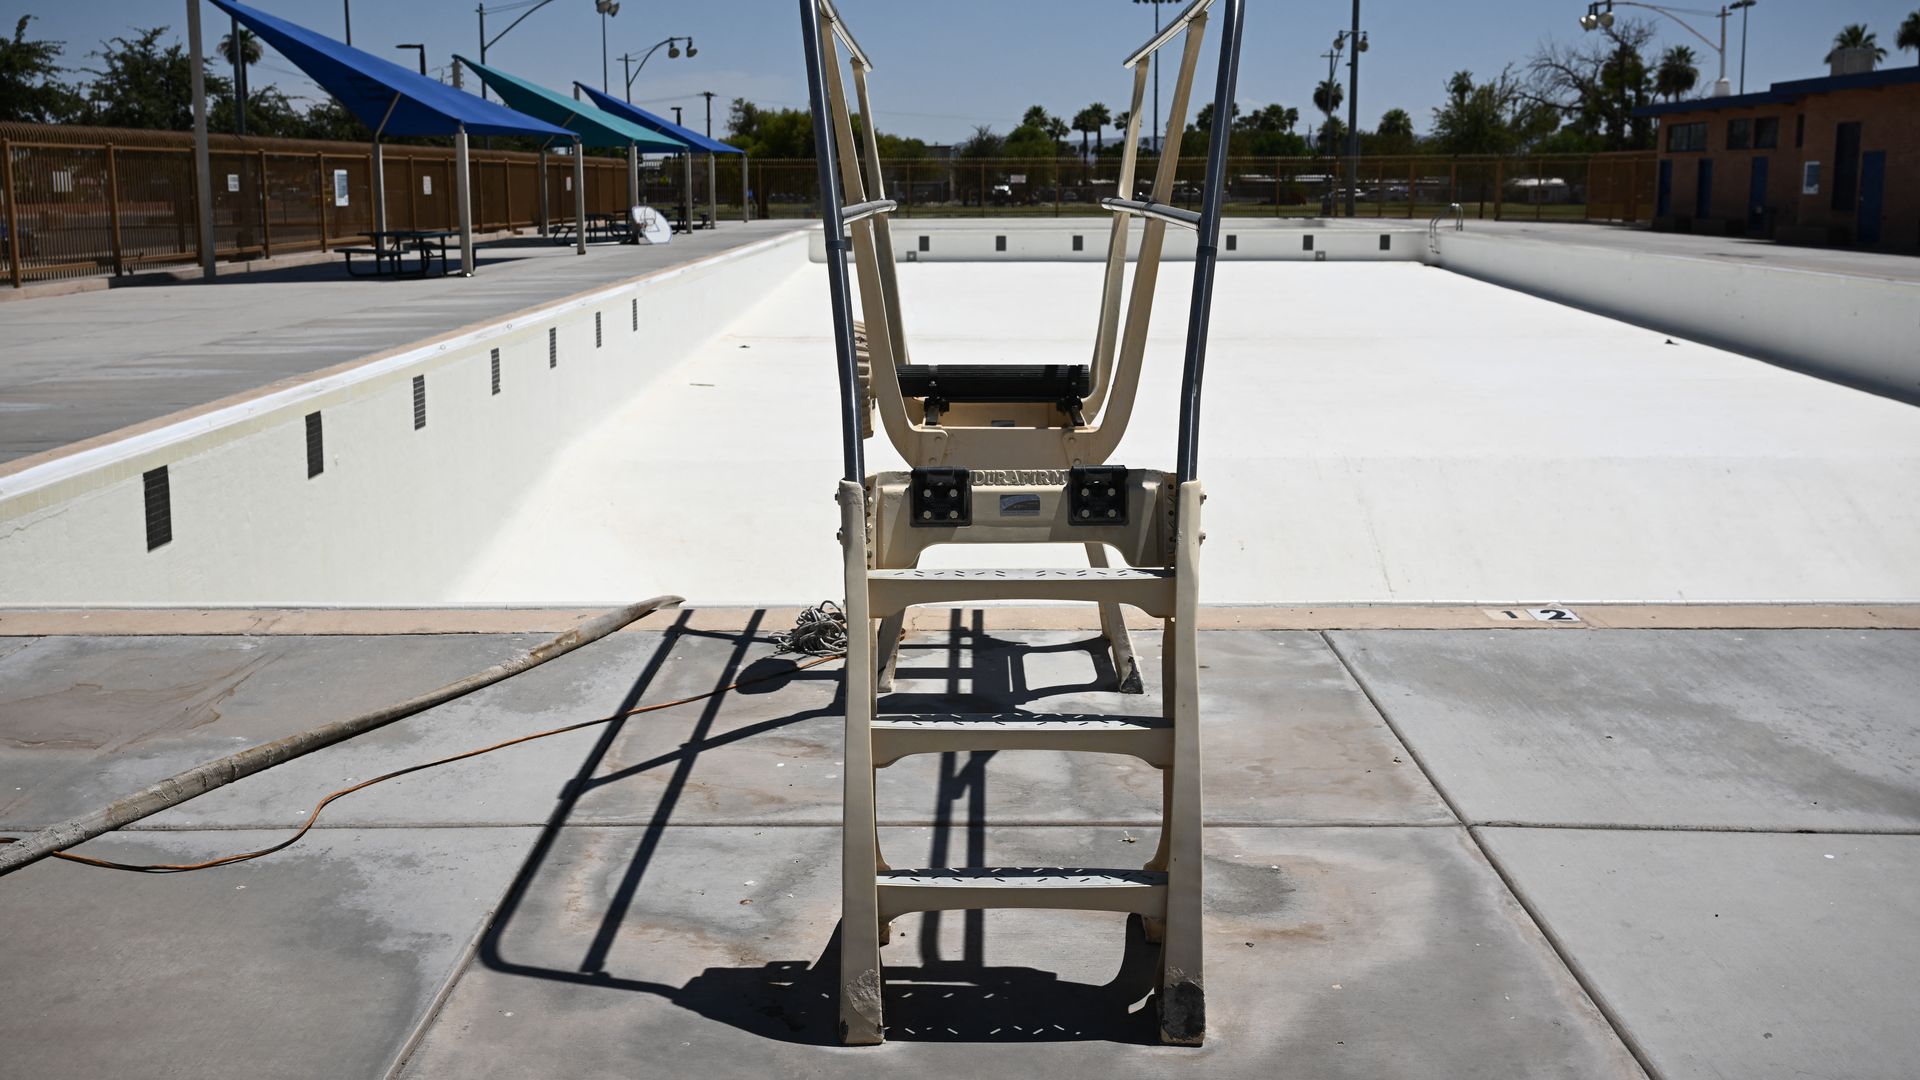 A disassembled diving board in front of a drained pool.